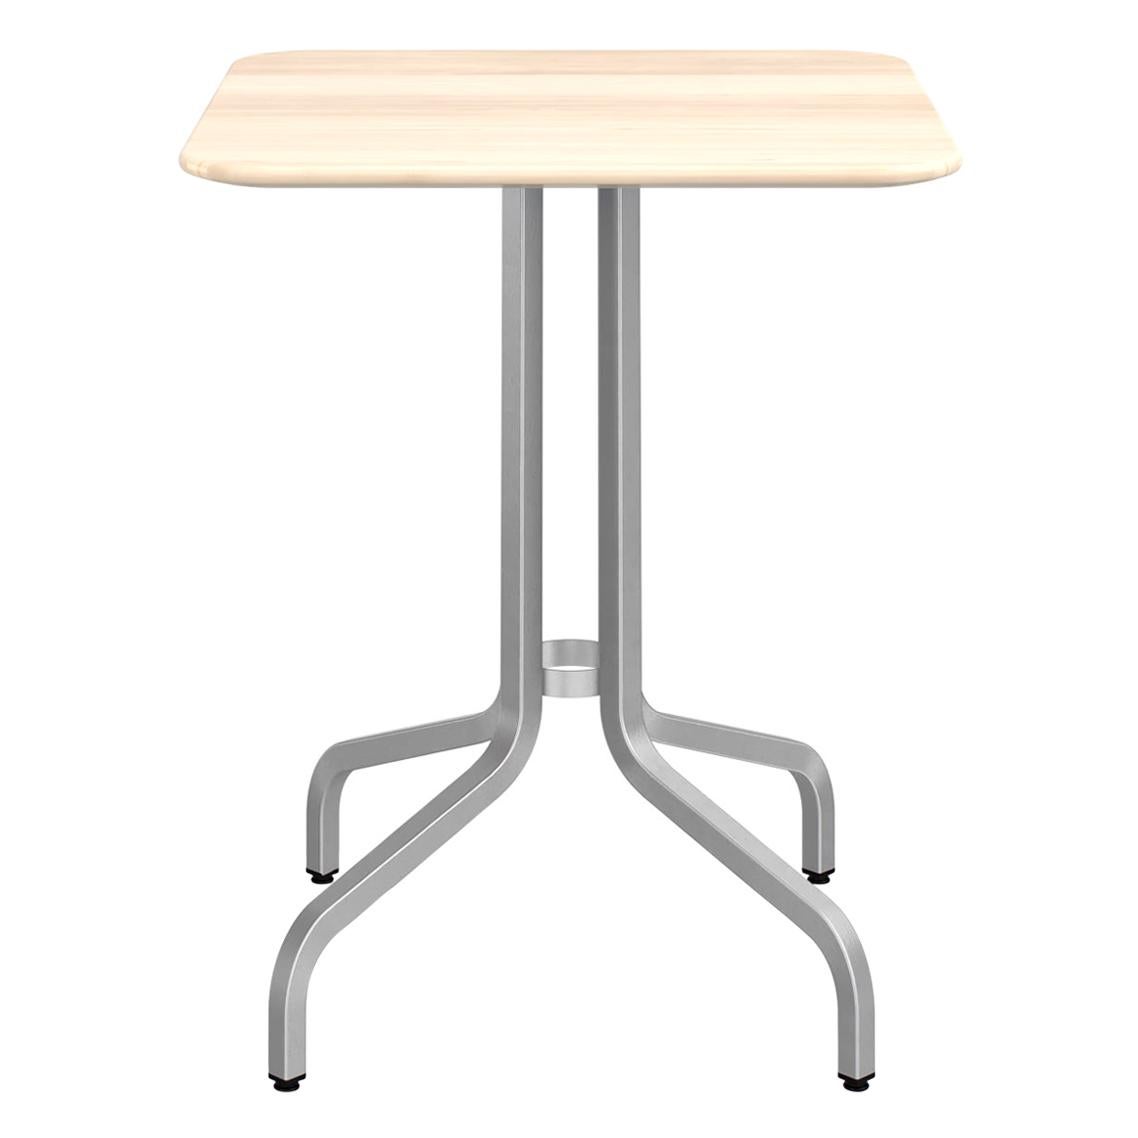 Emeco 1 Inch Small Cafe Table with Aluminum Legs & Wood Top by Jasper Morrison For Sale